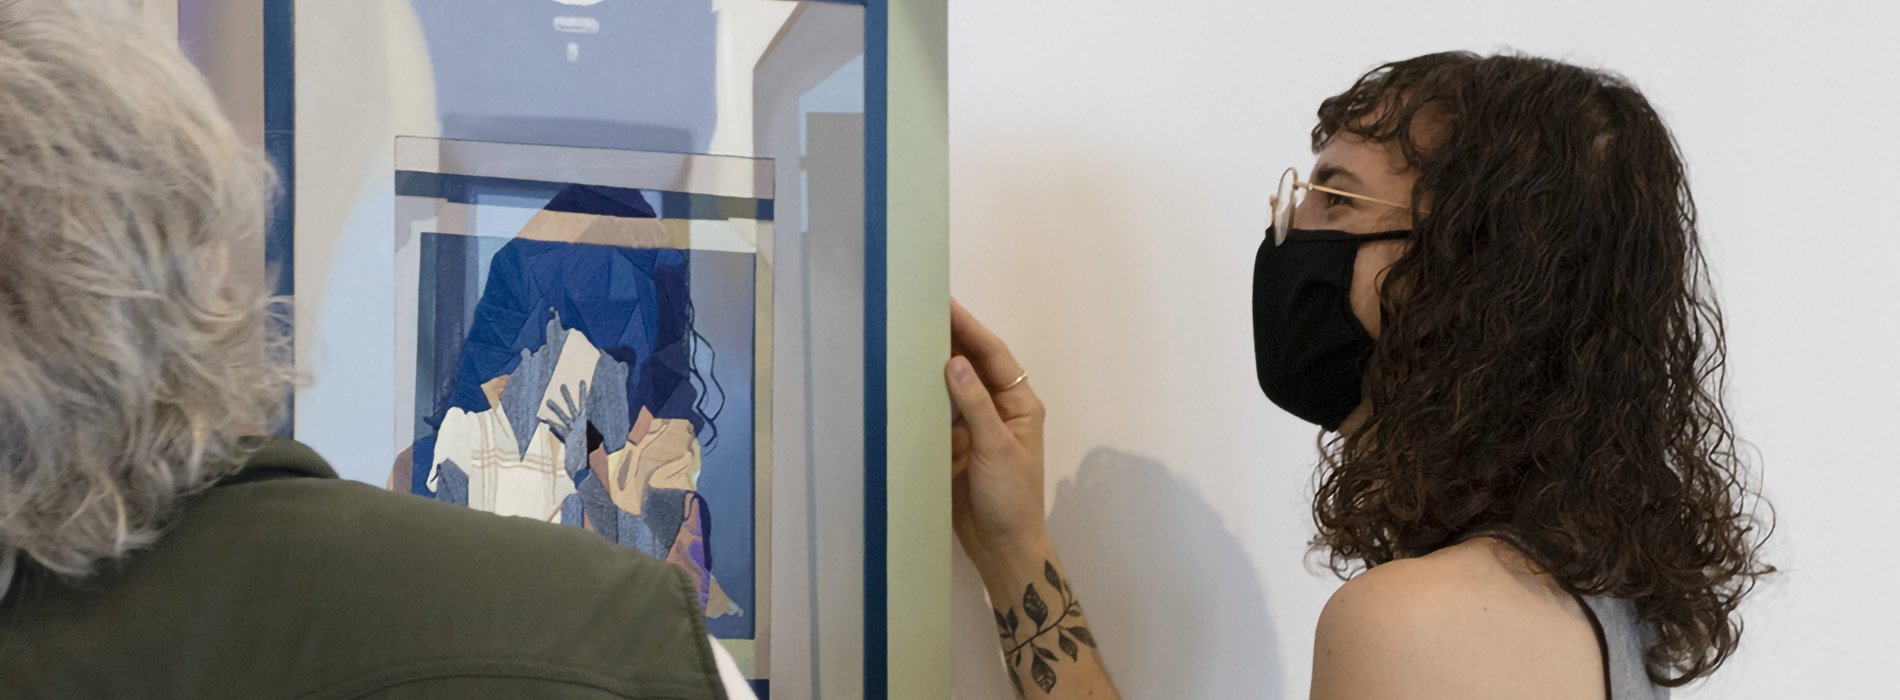 Masters student hanging her art with the help of a museum staff